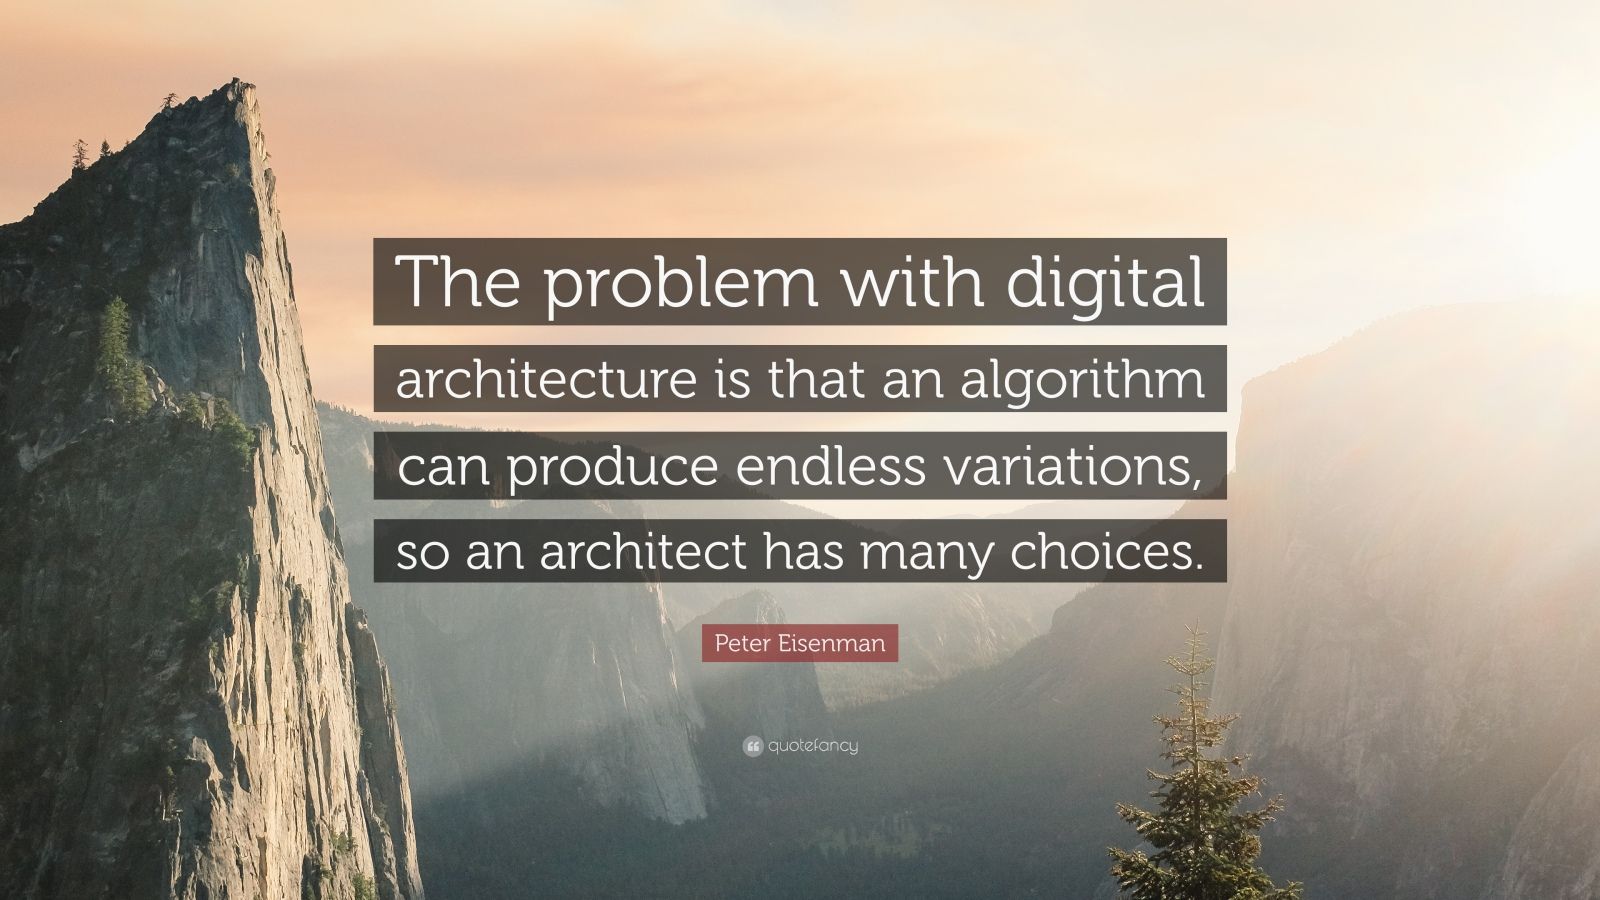 Peter eisenman quote âthe problem with digital architecture is that an algorithm can produce endless variations so an architect has many choiâ